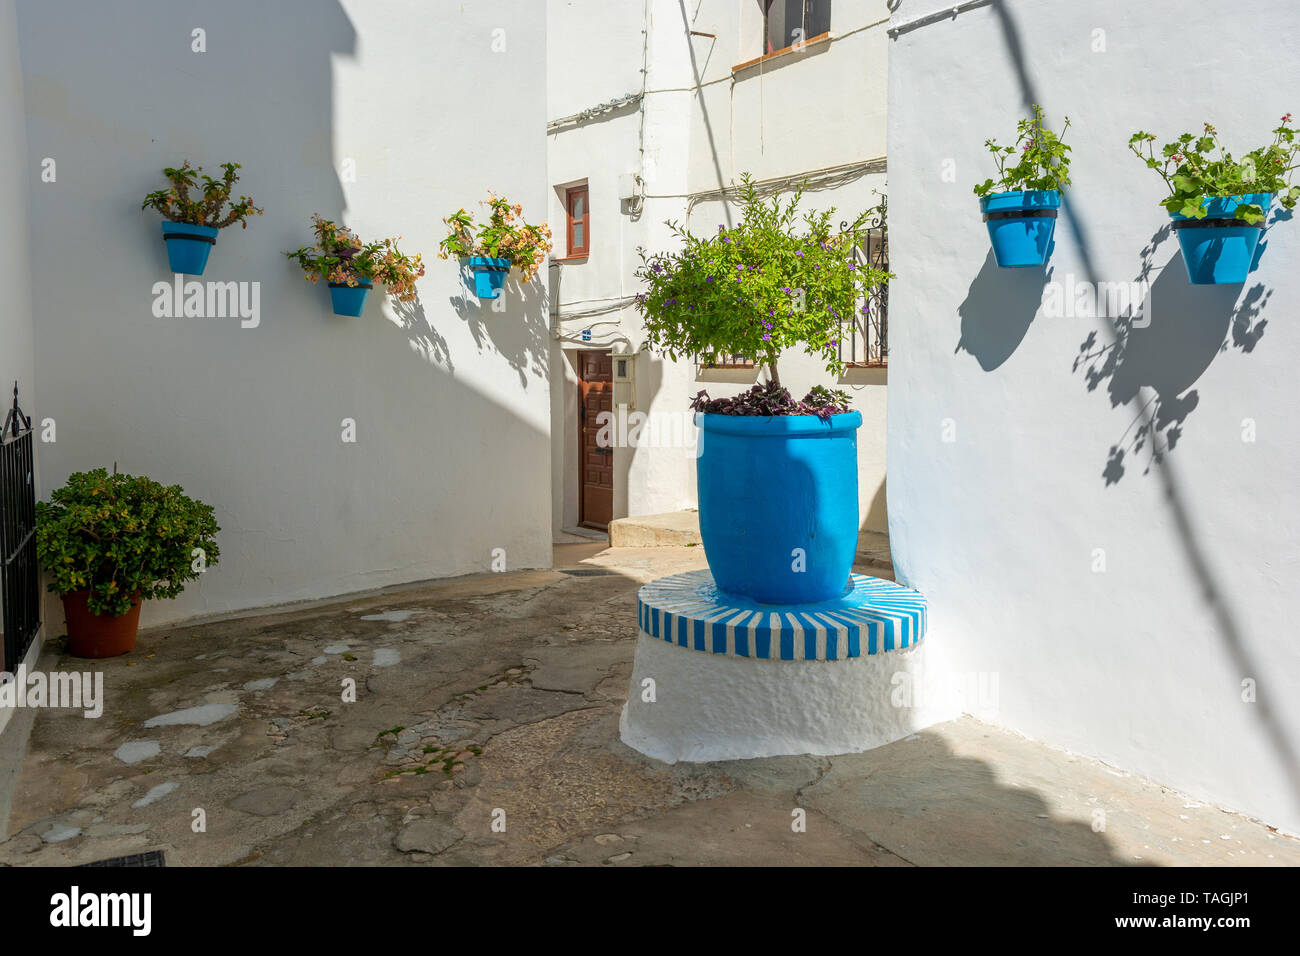 Blue plant pots hanging on white walls in the picturesque mountain village of Mijas, Andalusia region, Spain Stock Photo